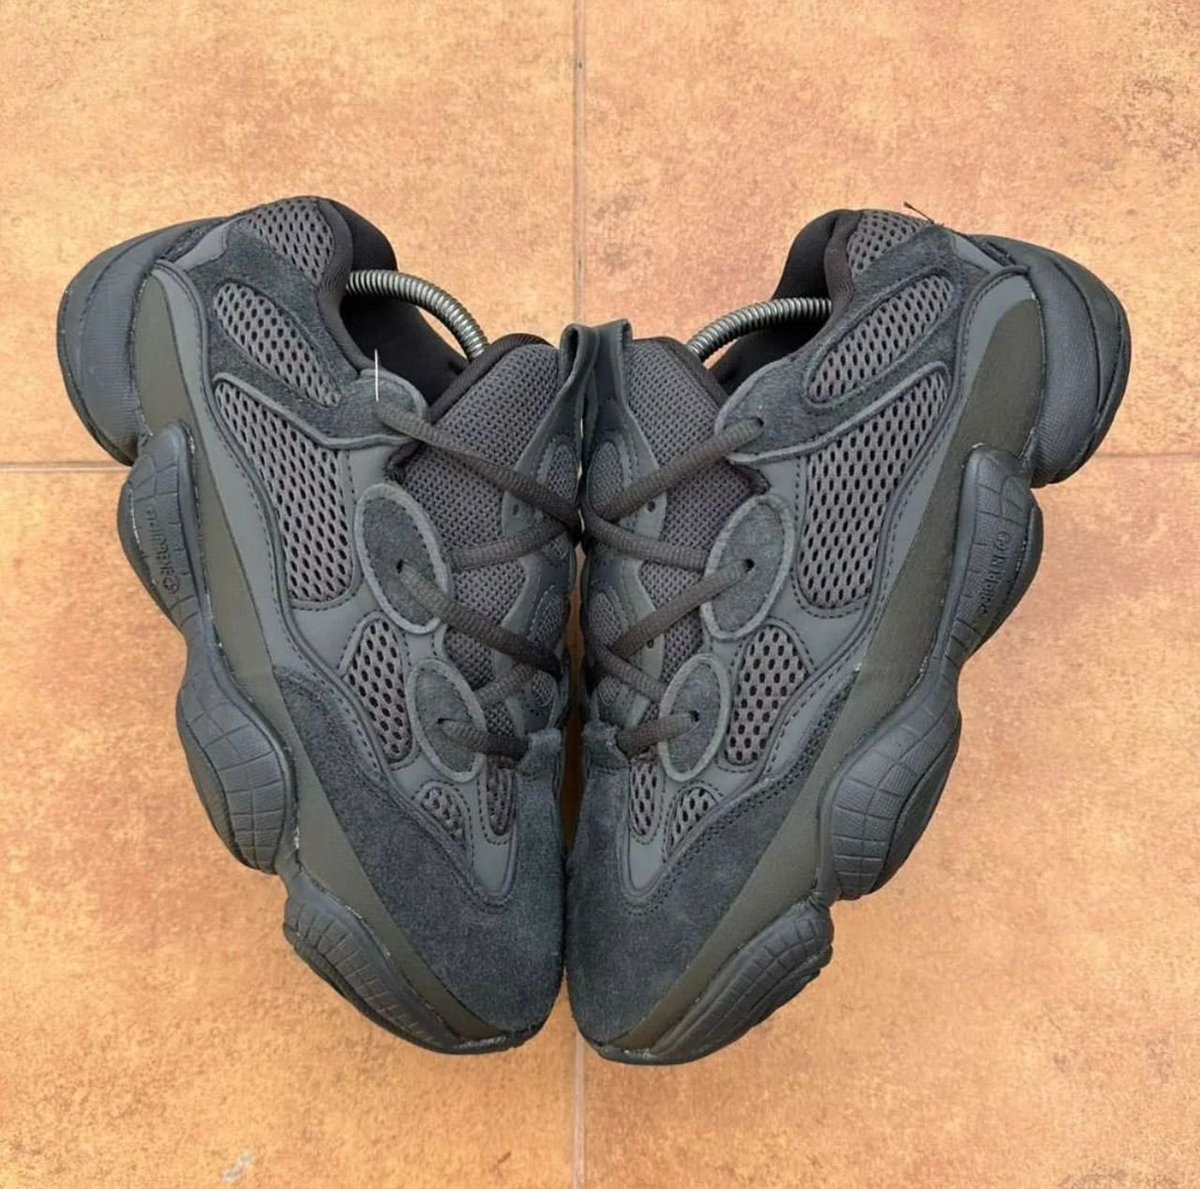 YEEZY 500 UTILITY BLACK

SIZE 40–45 AVAILABLE 

430 CEDIS 

DM/CALL/WHATSAP 0549891953 FOR PURCHASES.